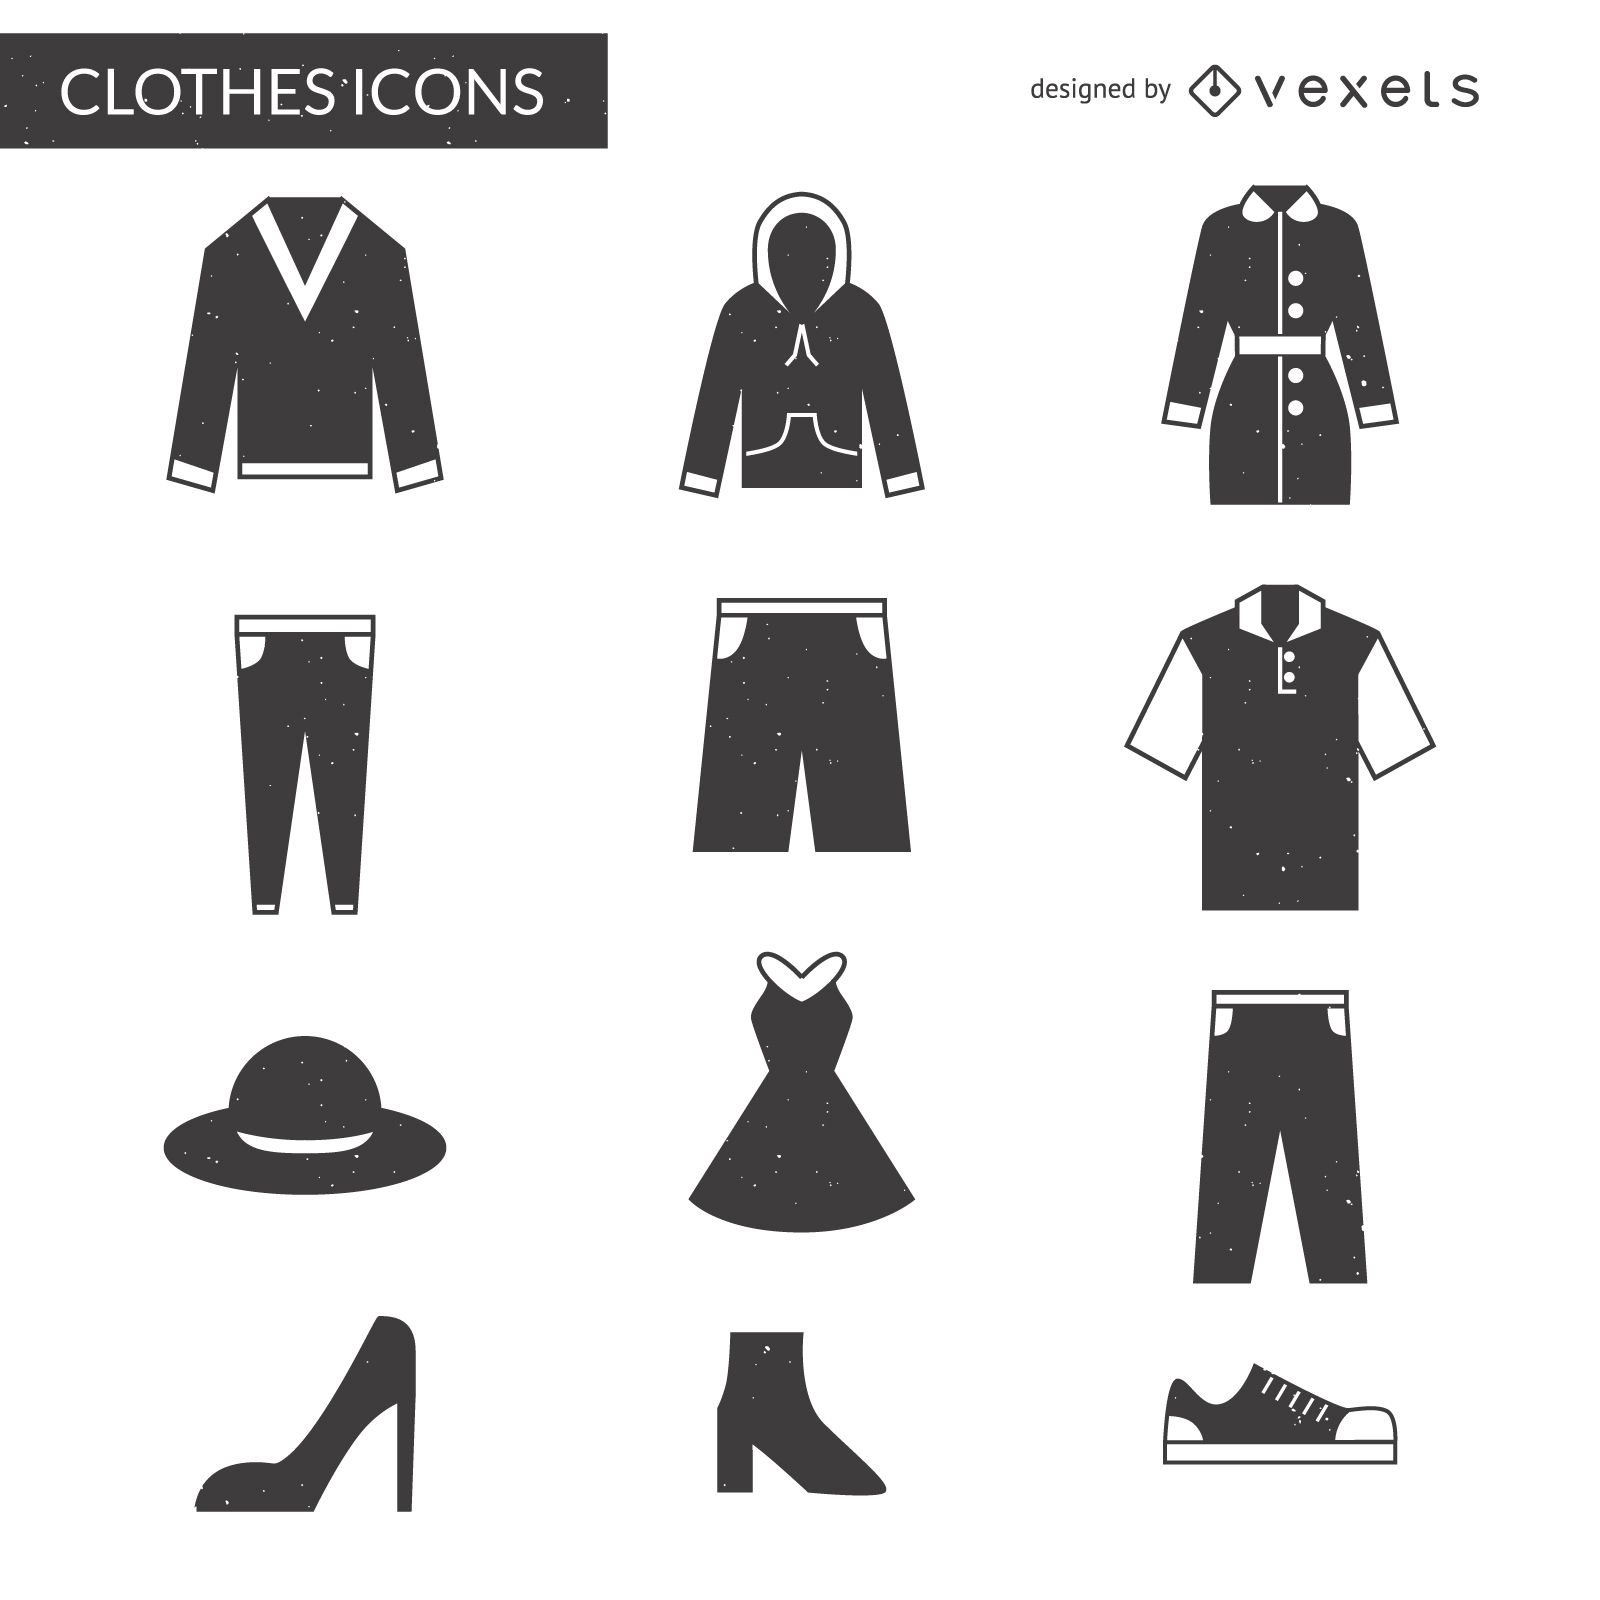 Flat clothes icon set lady and gentleman